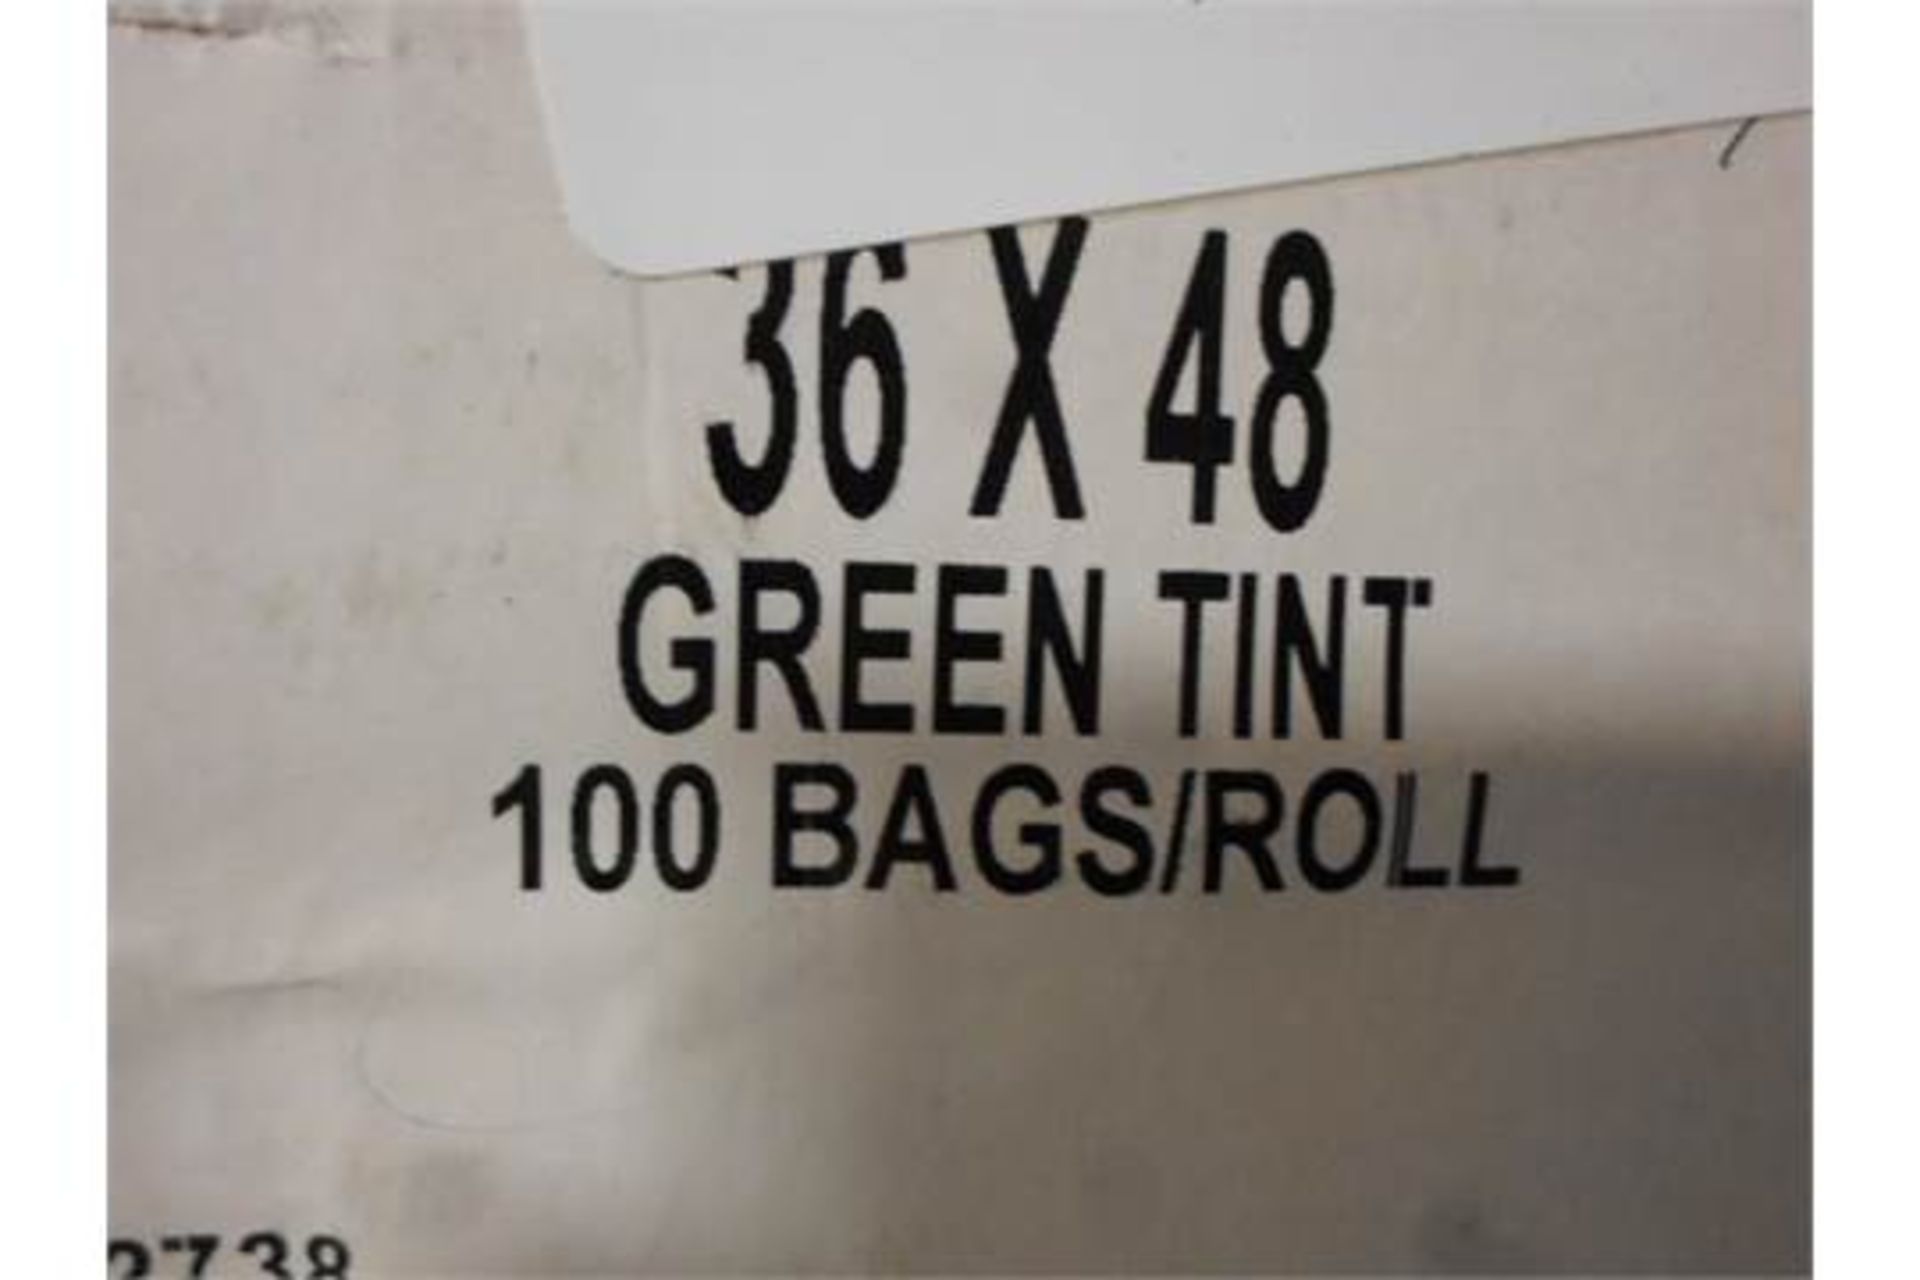 LOT OF SIX 50 GALLON BAG LOW DENSITY POLYETHLYNE 36X48 GREEN TINT 100 BAGS PER ROLL ONE ROLL IN EAC - Image 3 of 3